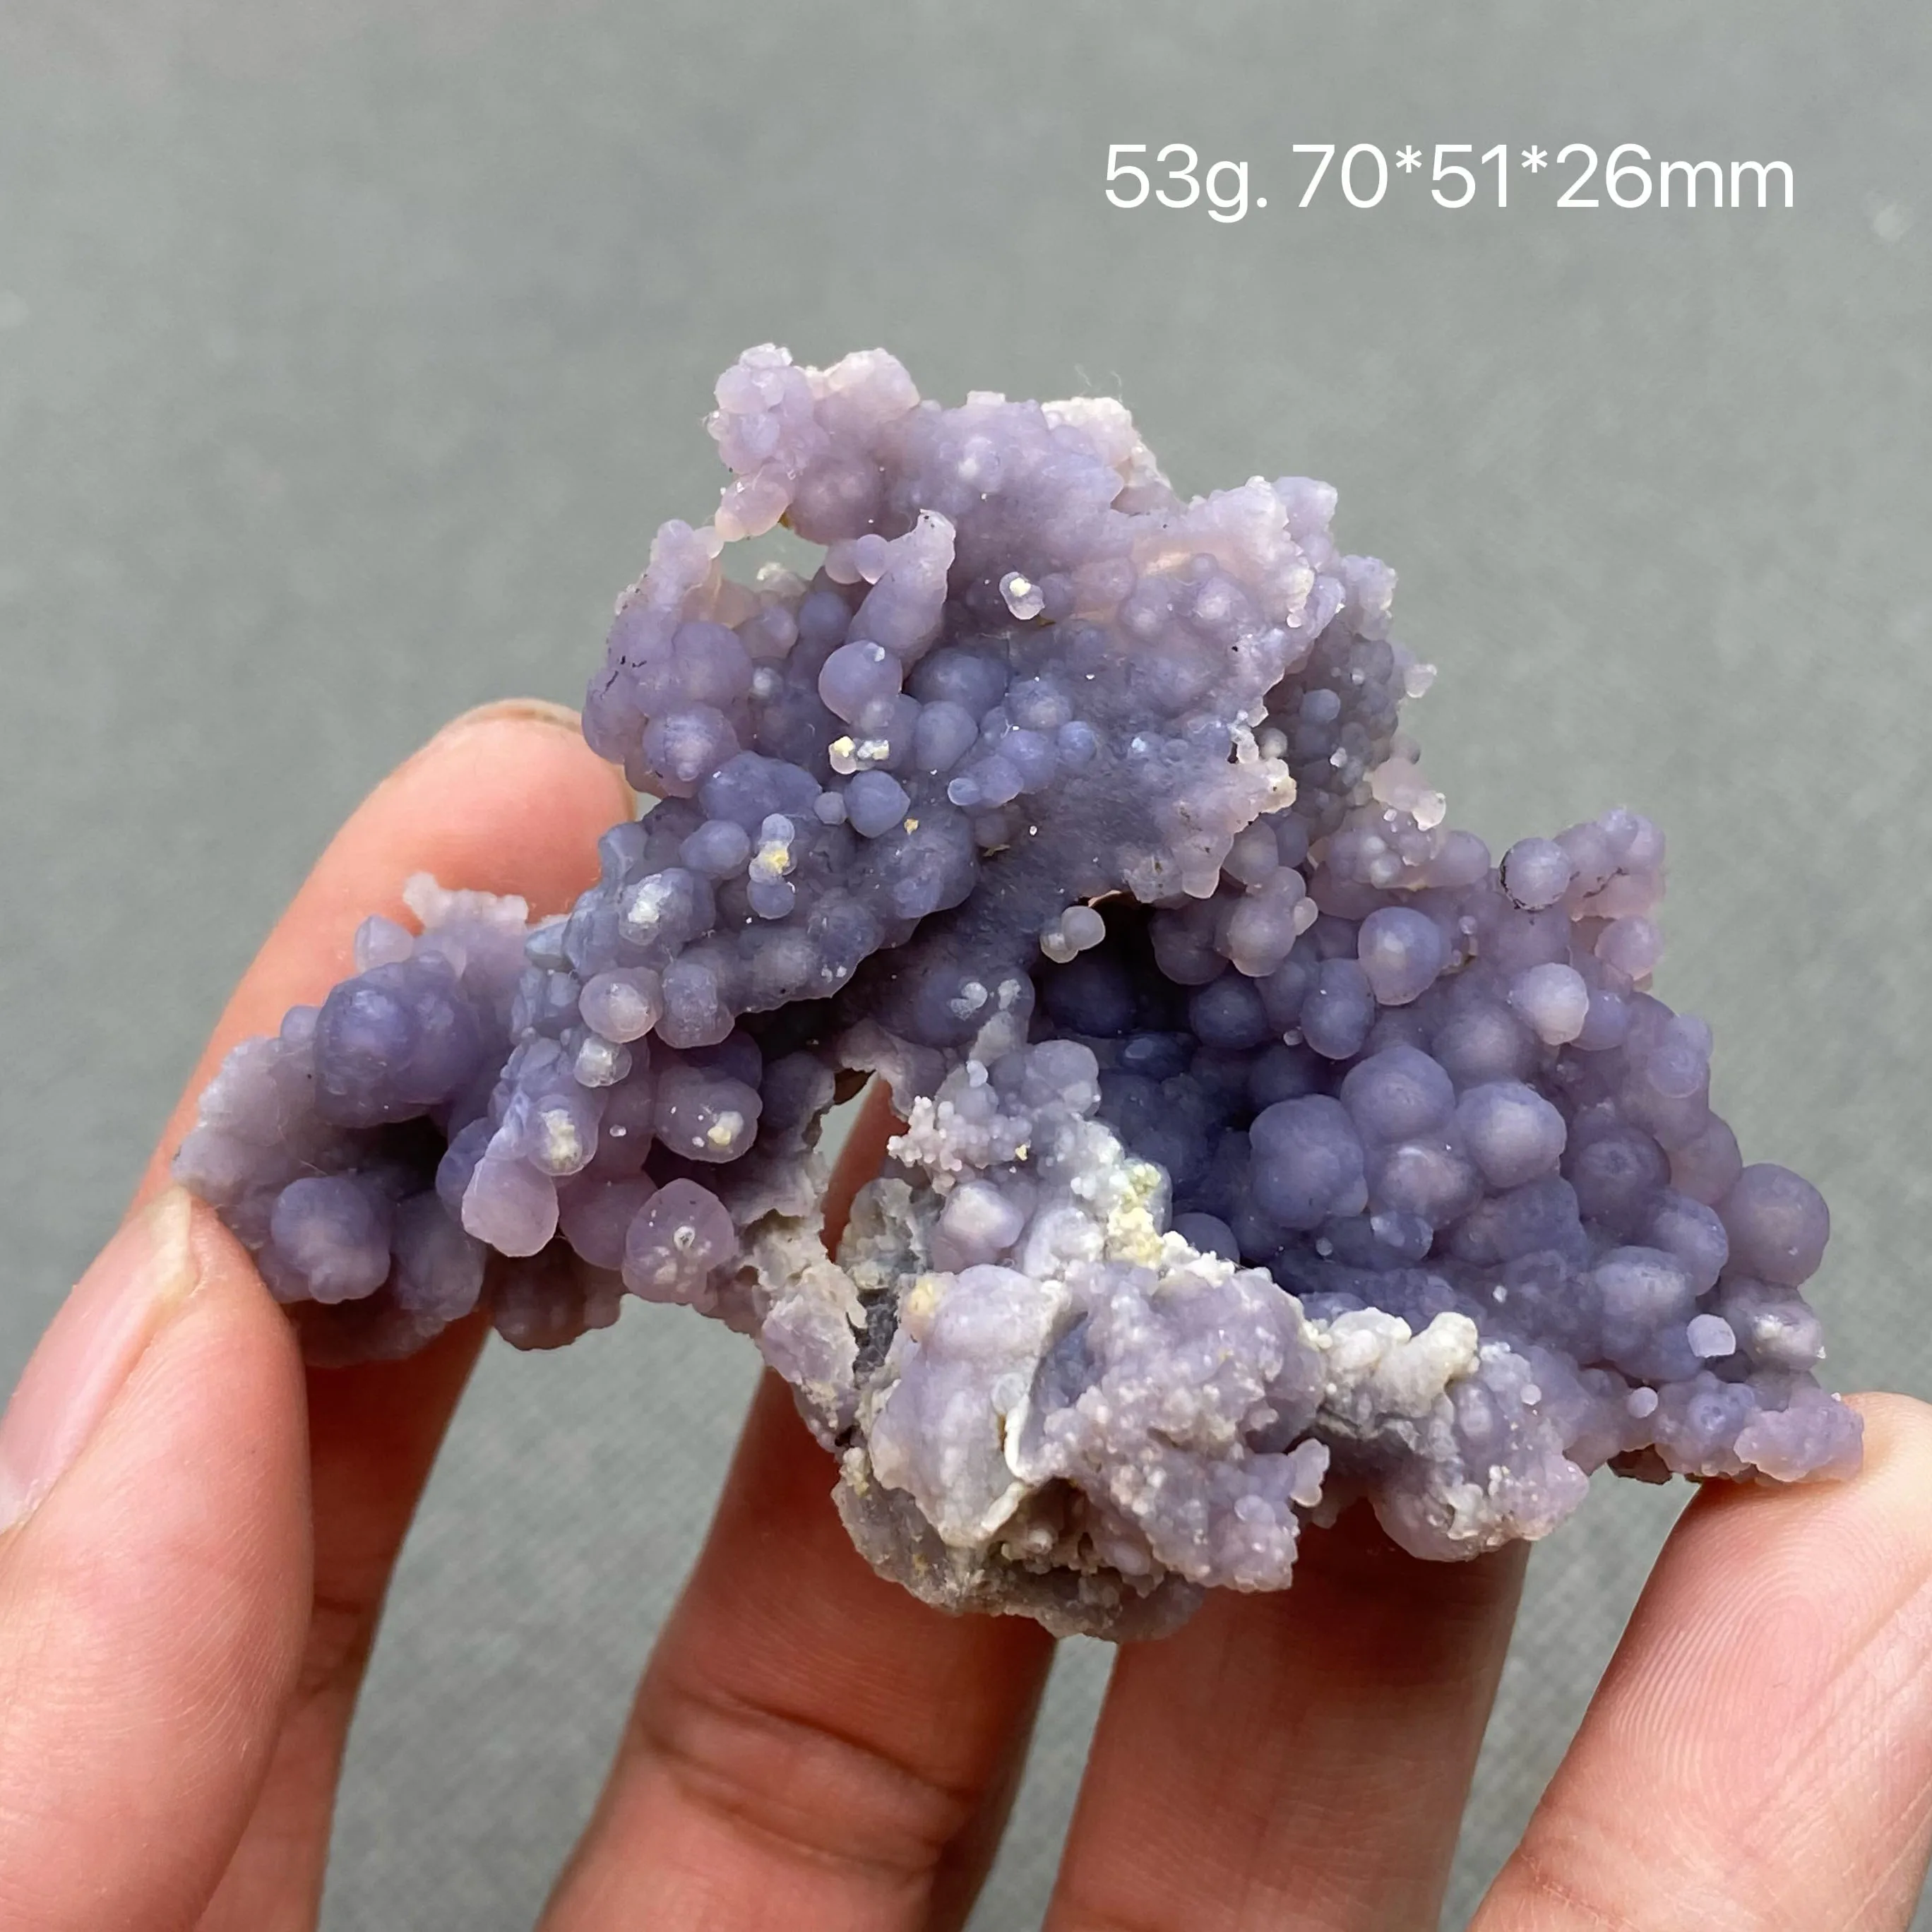 

100% Natural grape agate mineral specimen stones and crystals healing crystals quartz gemstones free shipping